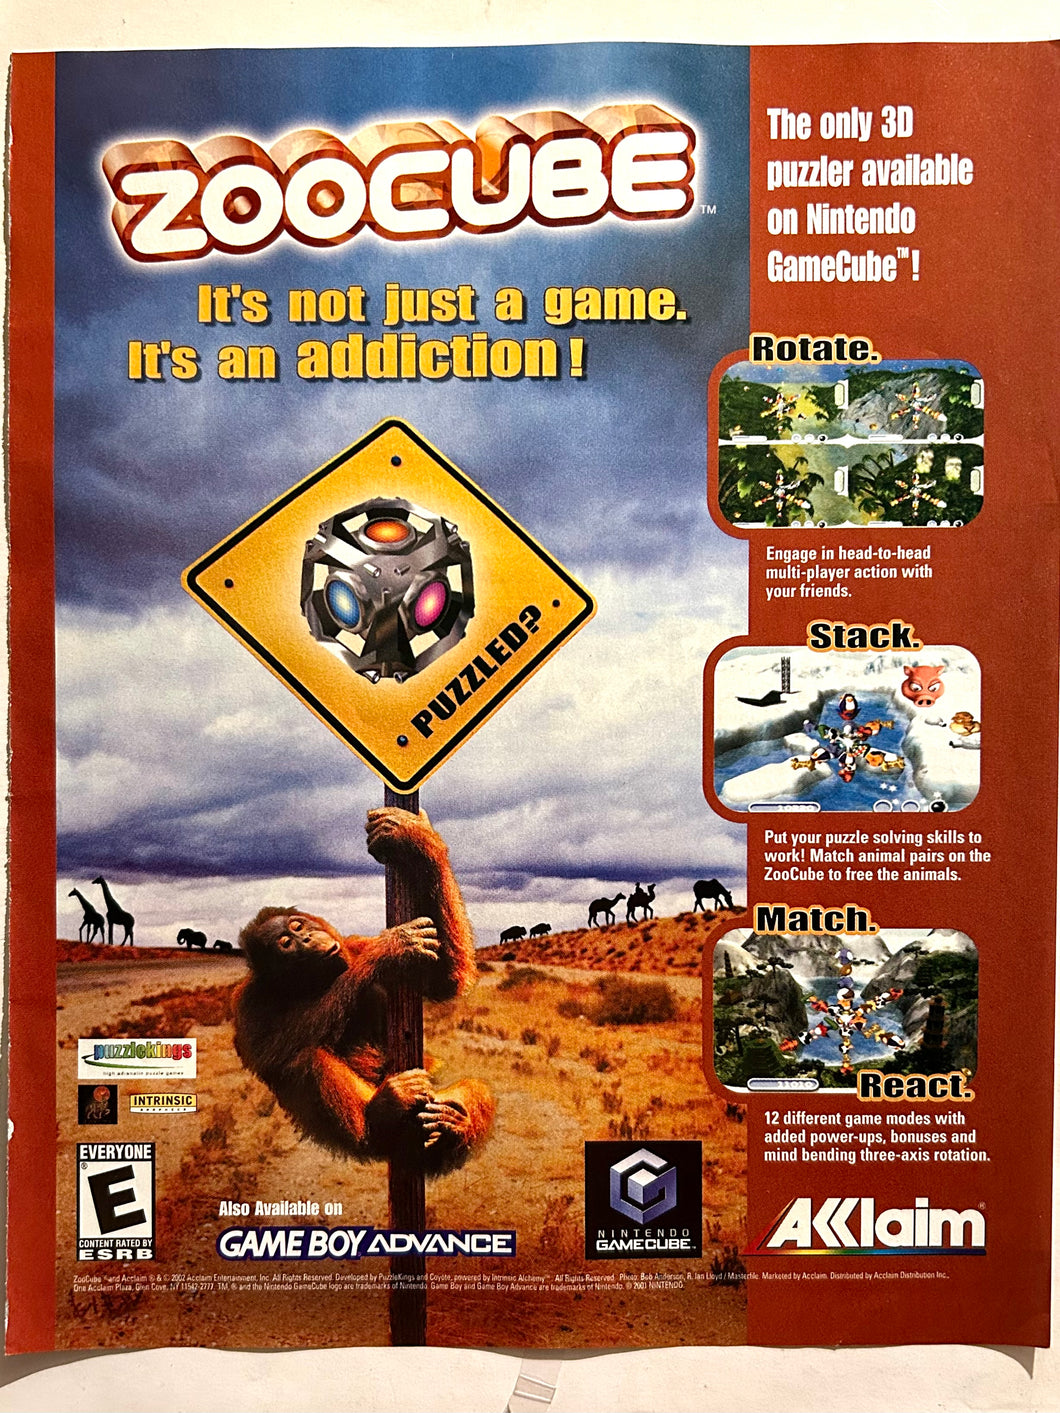 Zoocube - NGC GBA - Original Vintage Advertisement - Print Ads - Laminated A4 Poster